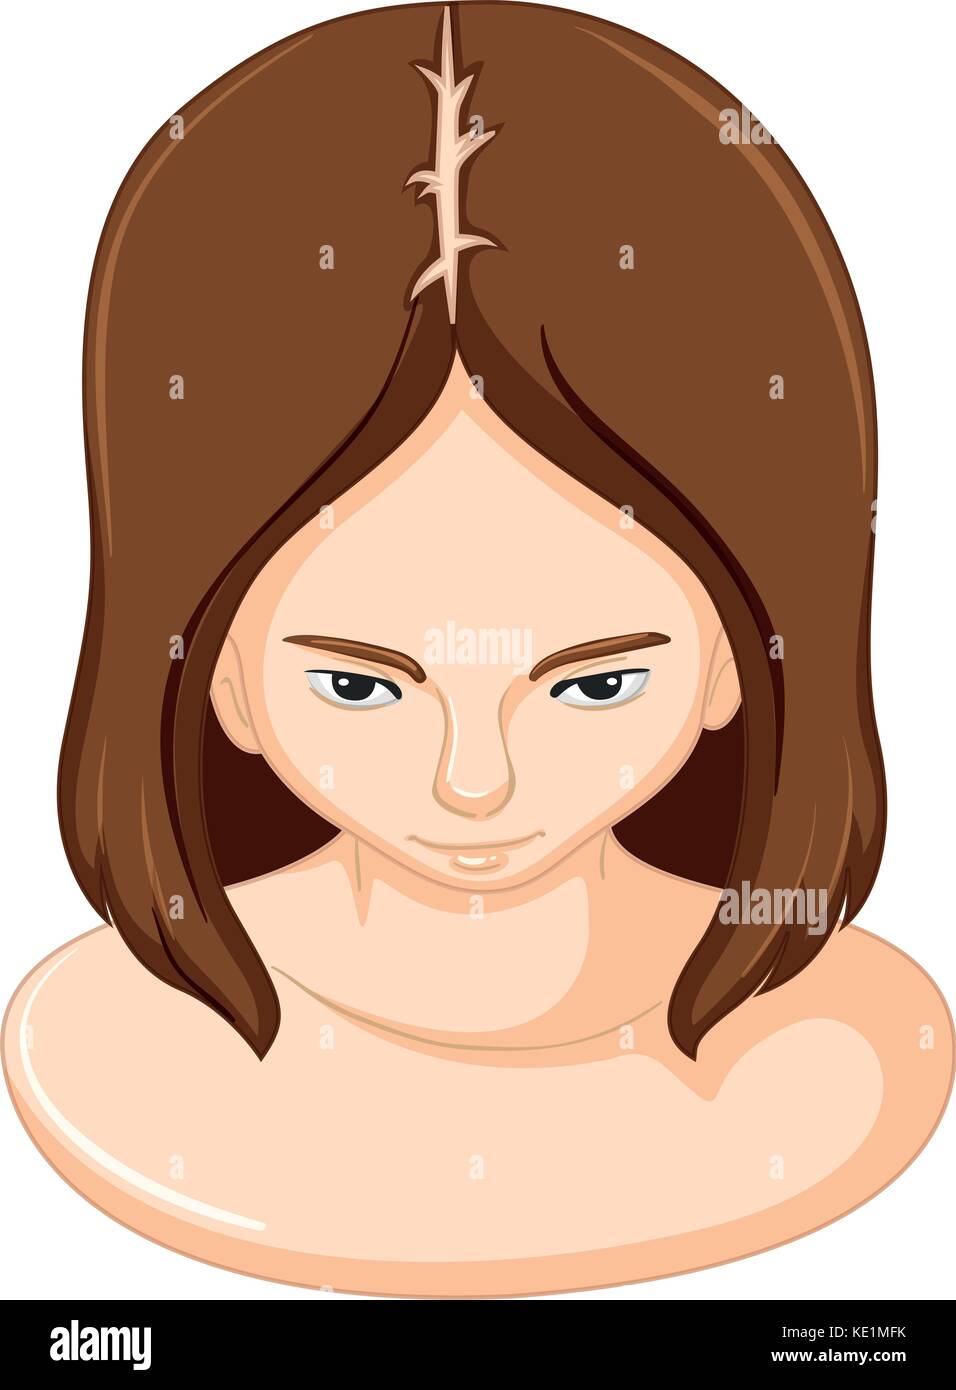 Woman and thinning hair illustration Stock Vector